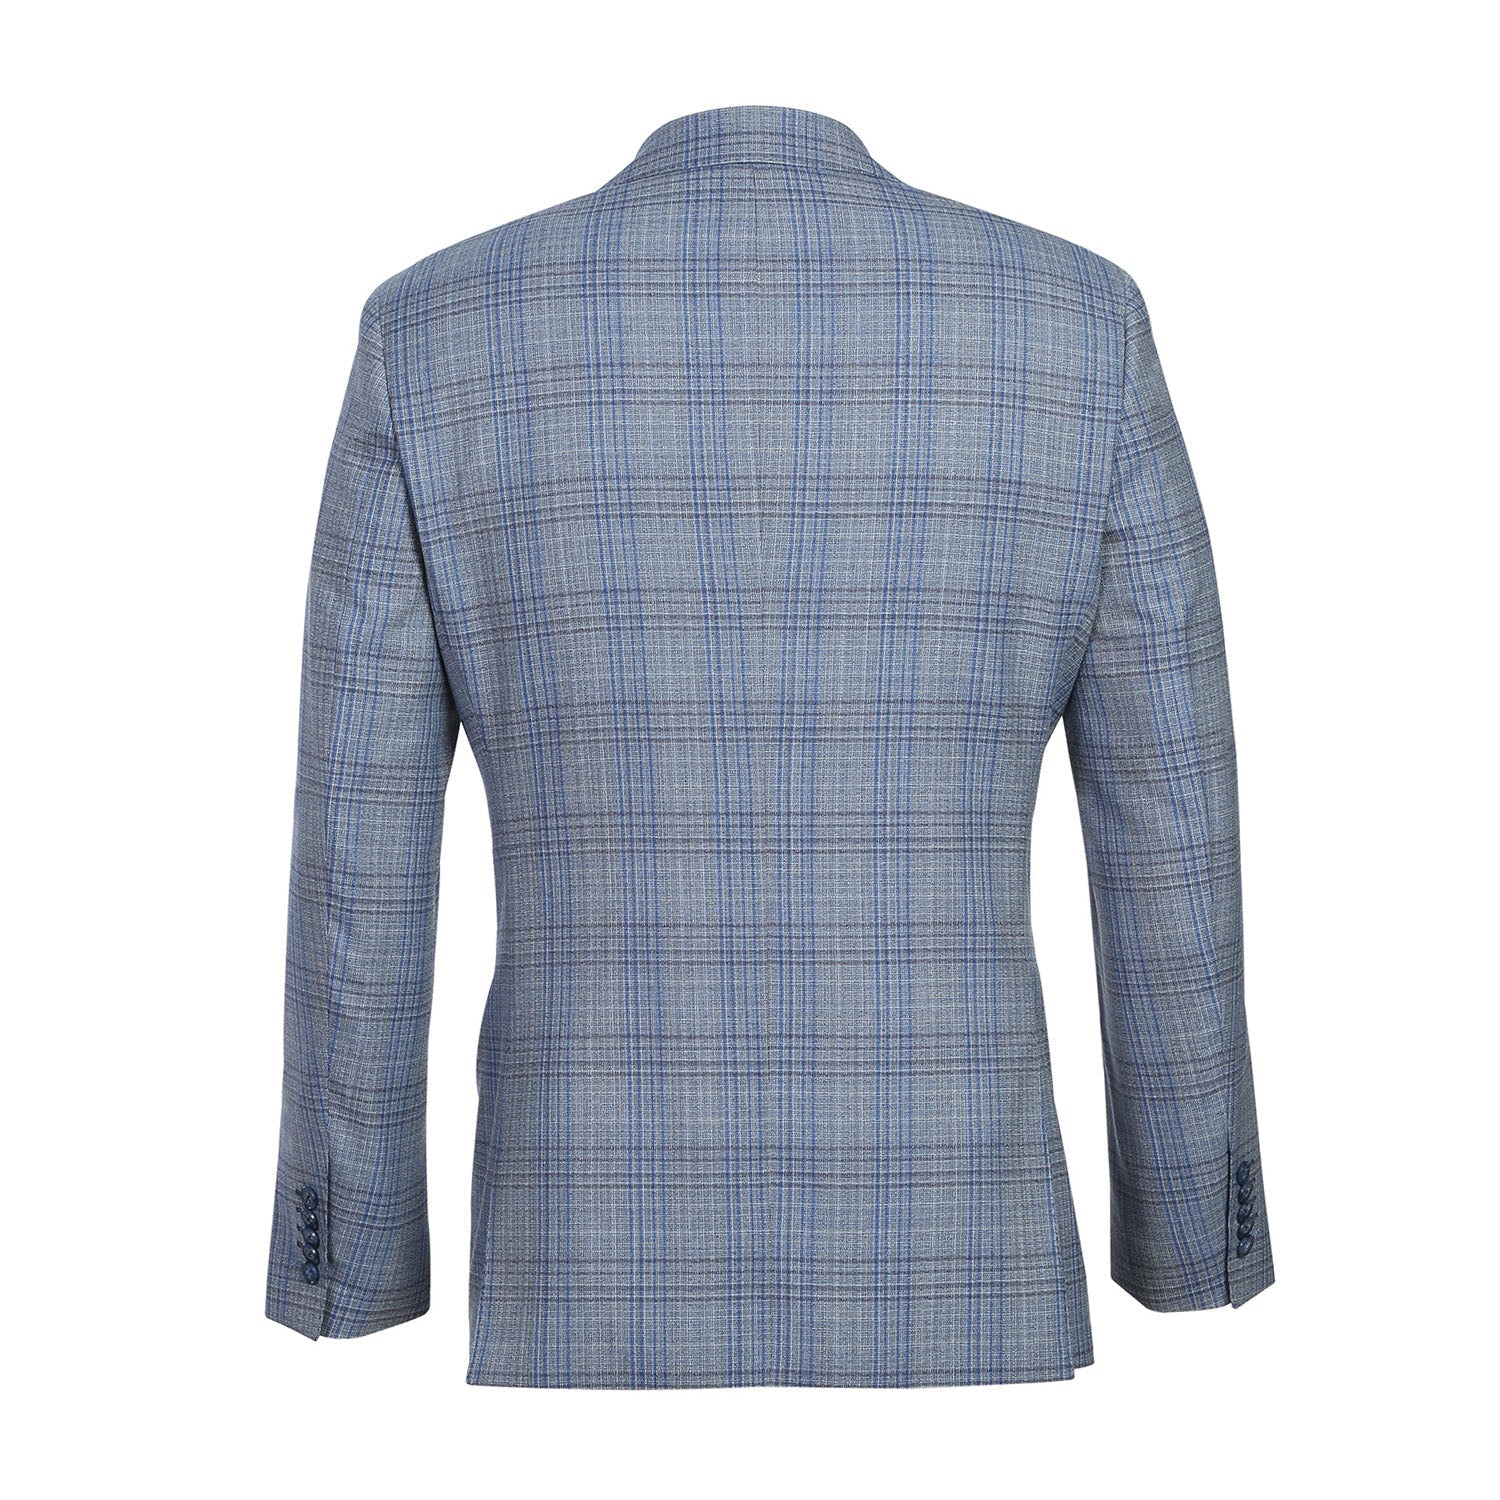 Wool Stretch Single Breasted SLIM FIT Suit in Light Grey and Blue Check (Short, Regular, and Long Available) by English Laundry